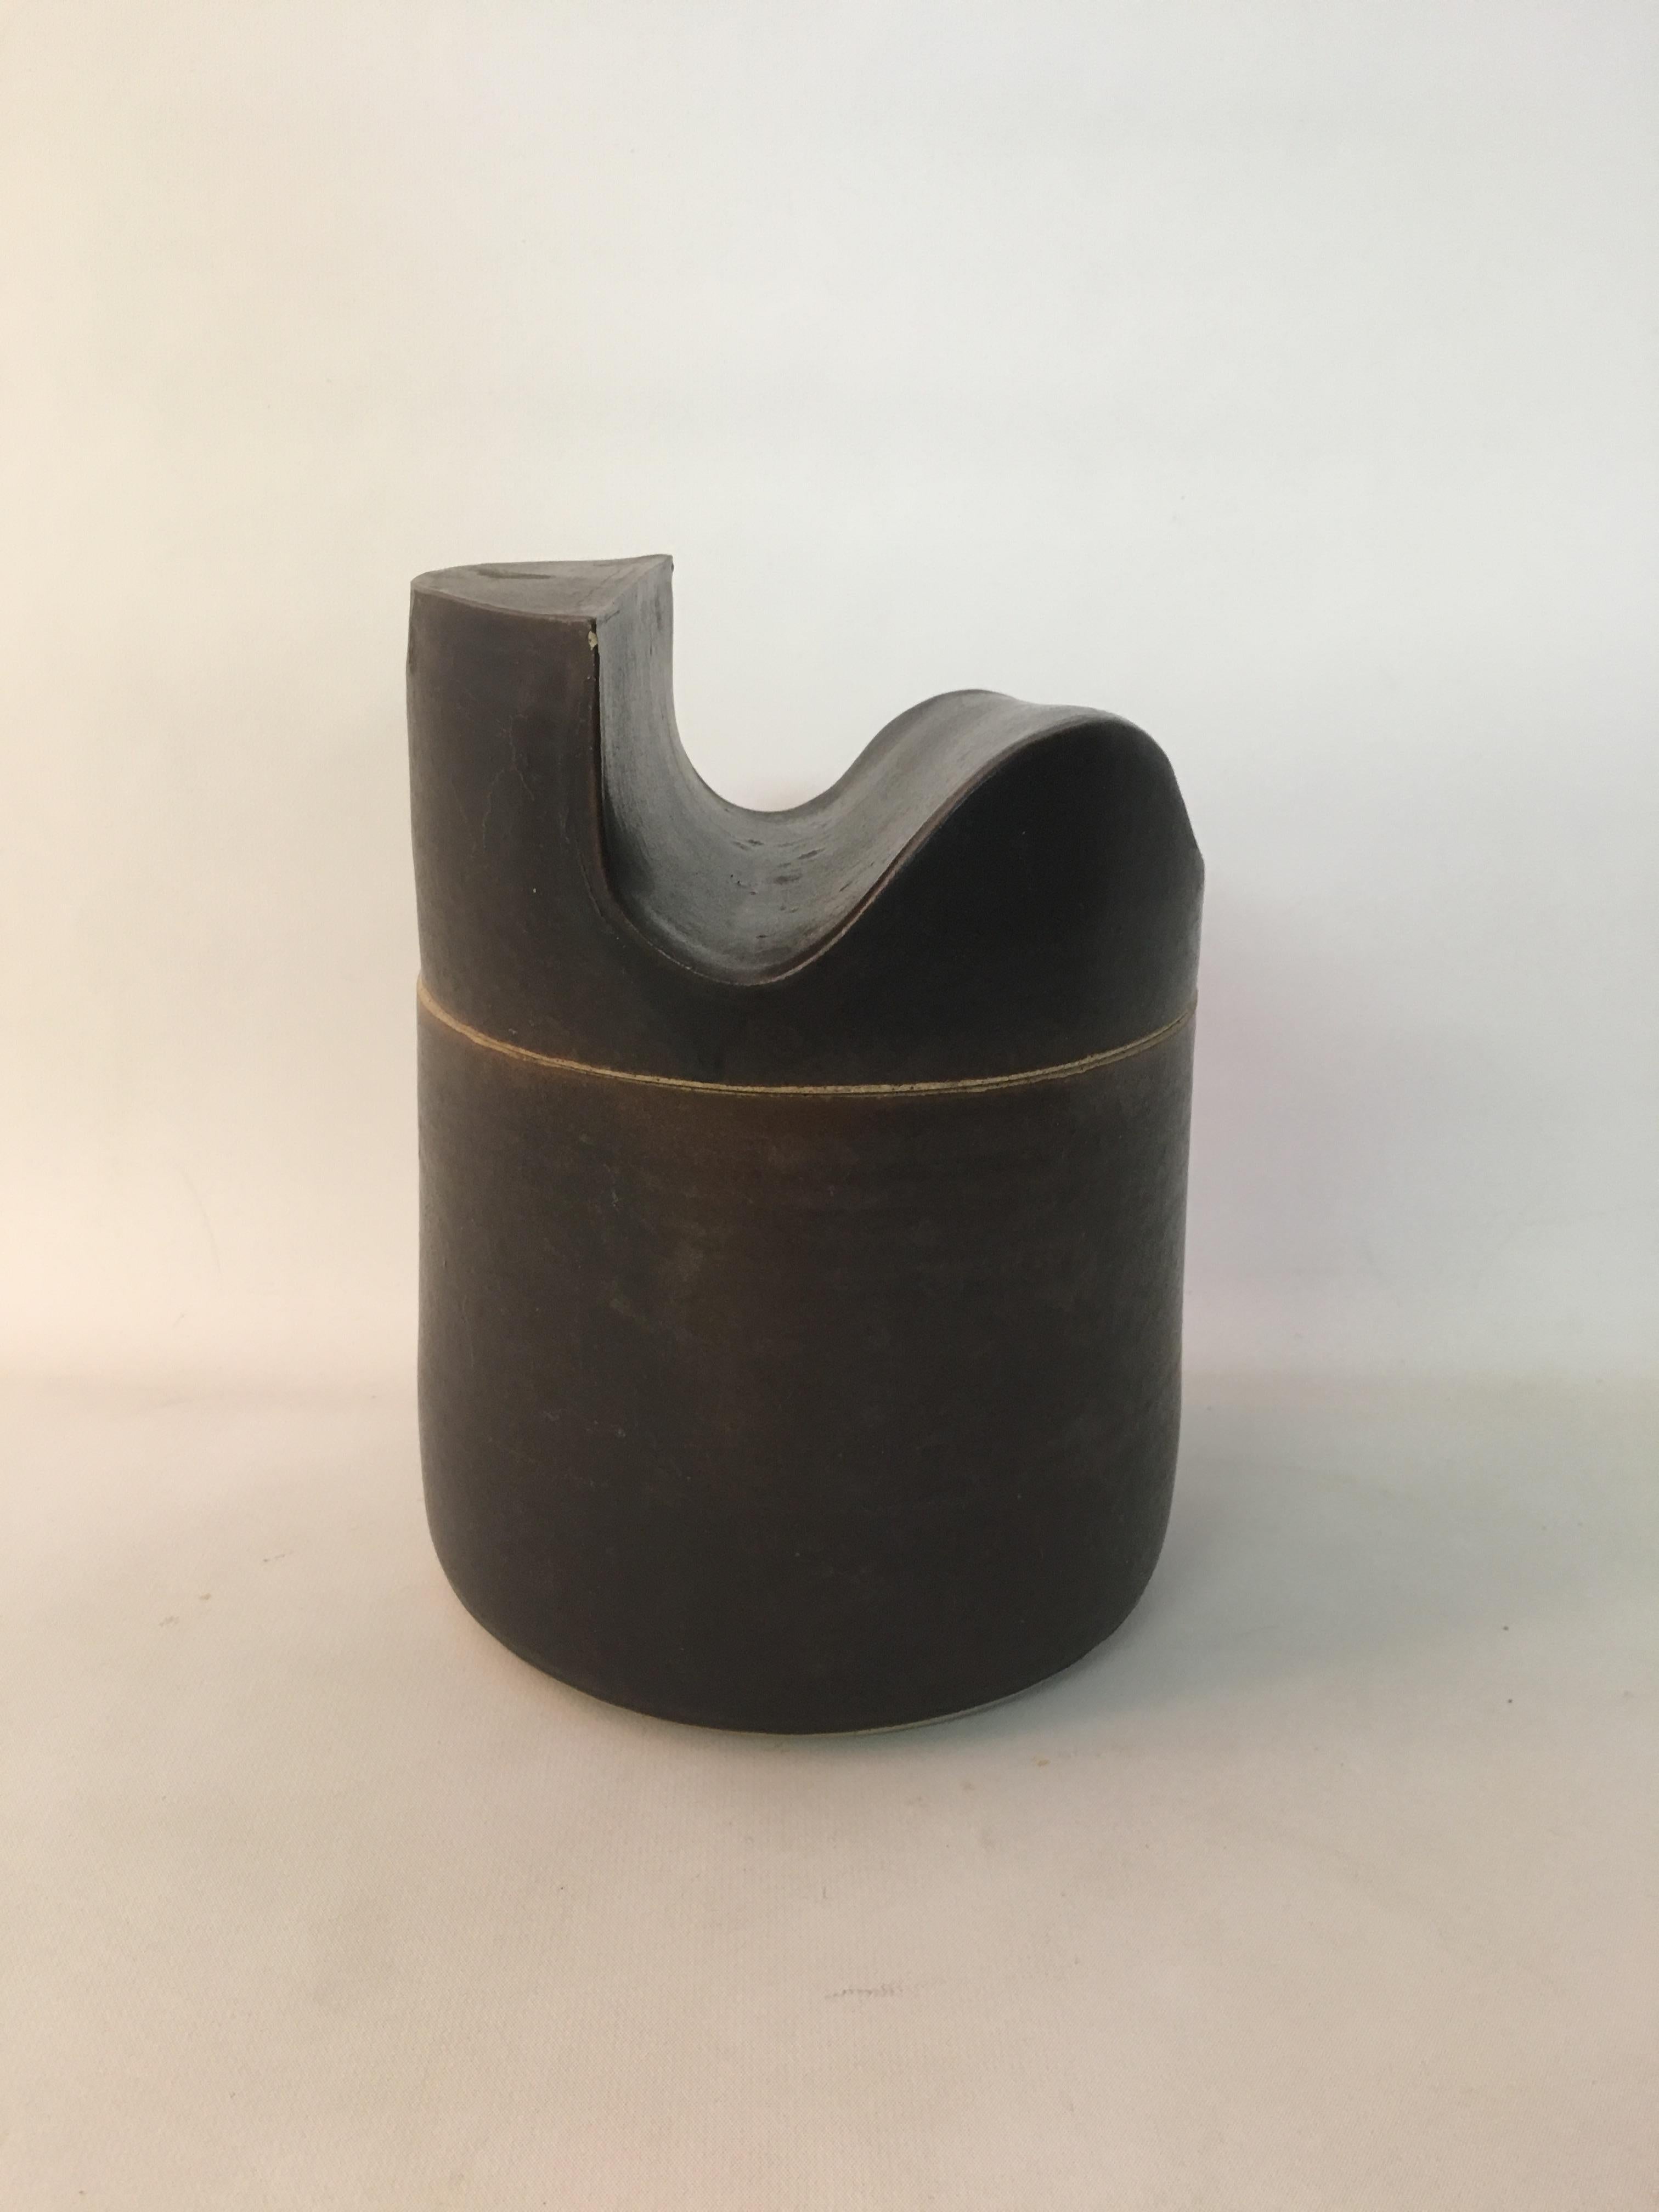 Don Williams designed hand built ceramic covered jar, circa 1980-1990. Handmade and glazed in a matte brown. Supple, lyrical, architectural, curvilinear design. Fully signed on the bottom, D. Williams.

 